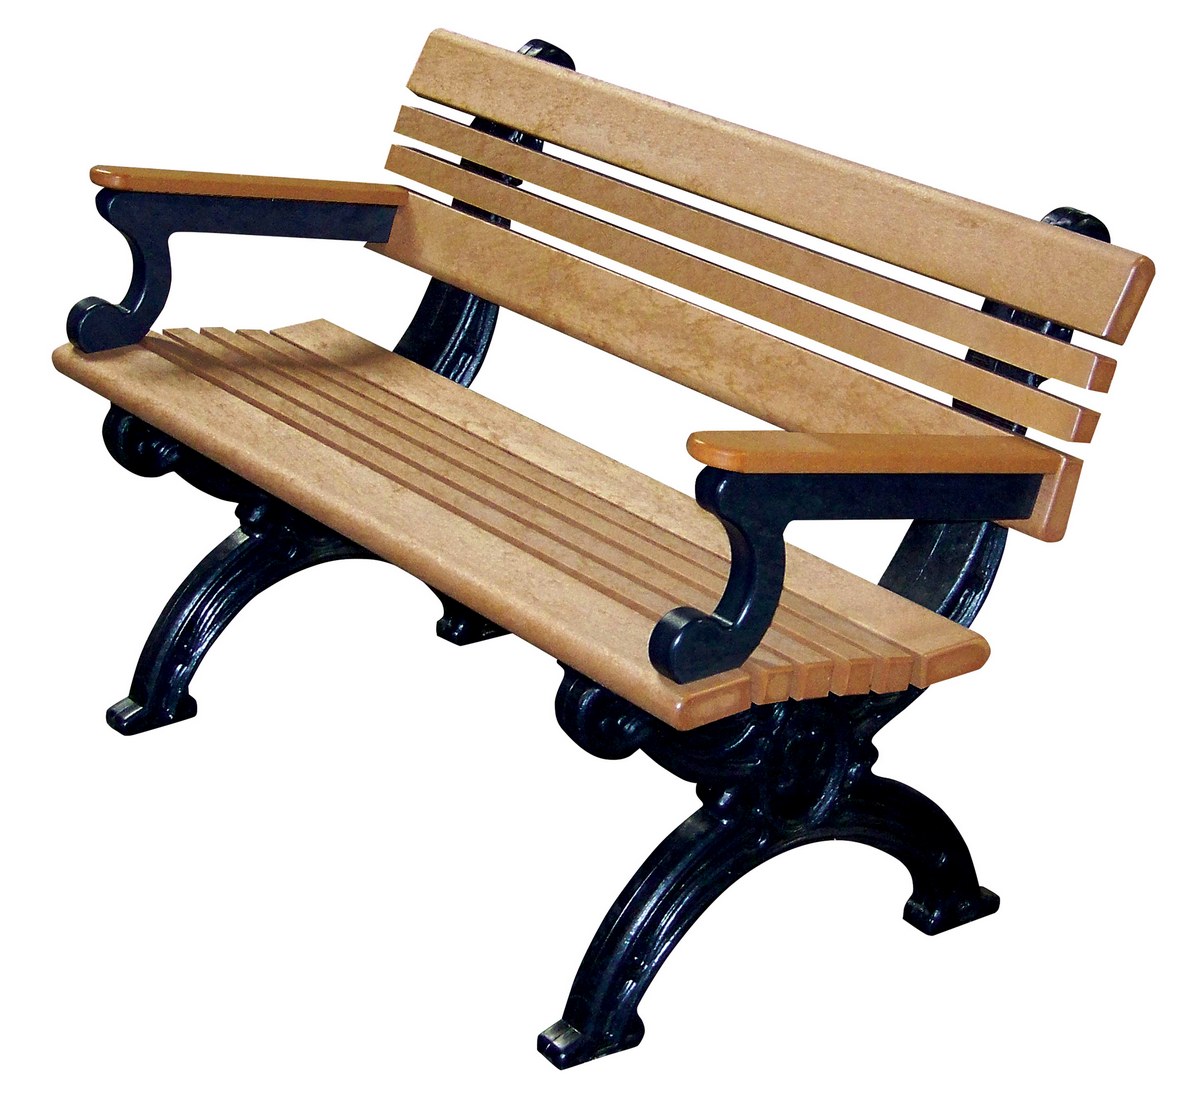 BEN-PCBA-48-BKCD Recycled Plastic Park Benches